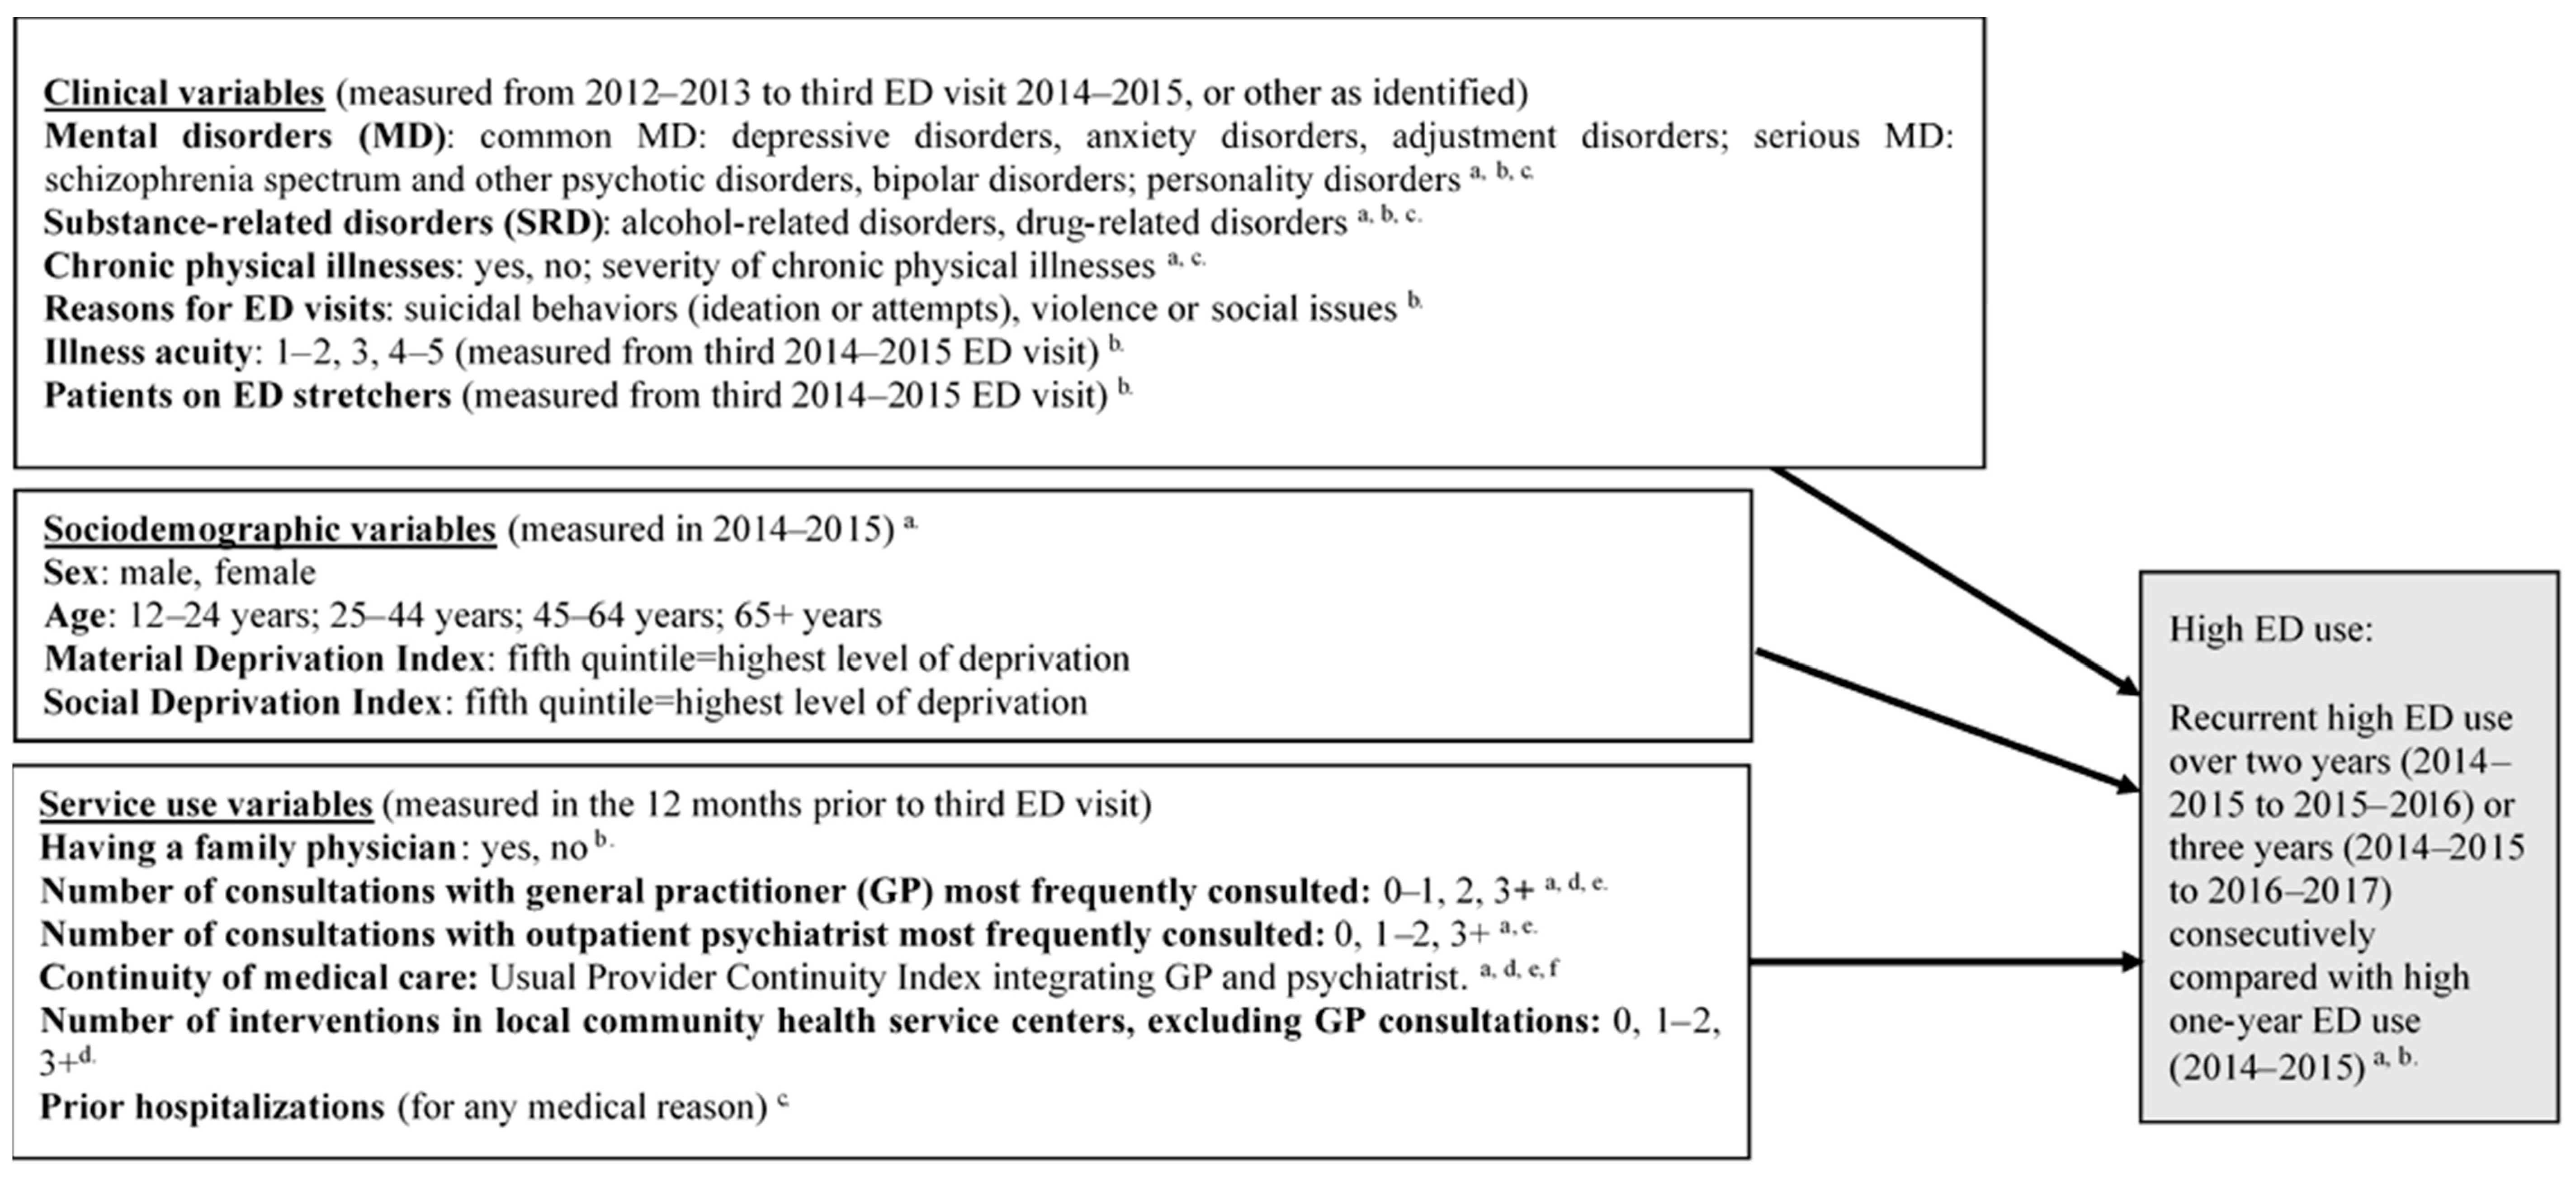 IJERPH | Free Full-Text | Predictors of Recurrent High Emergency Department  Use among Patients with Mental Disorders | HTML